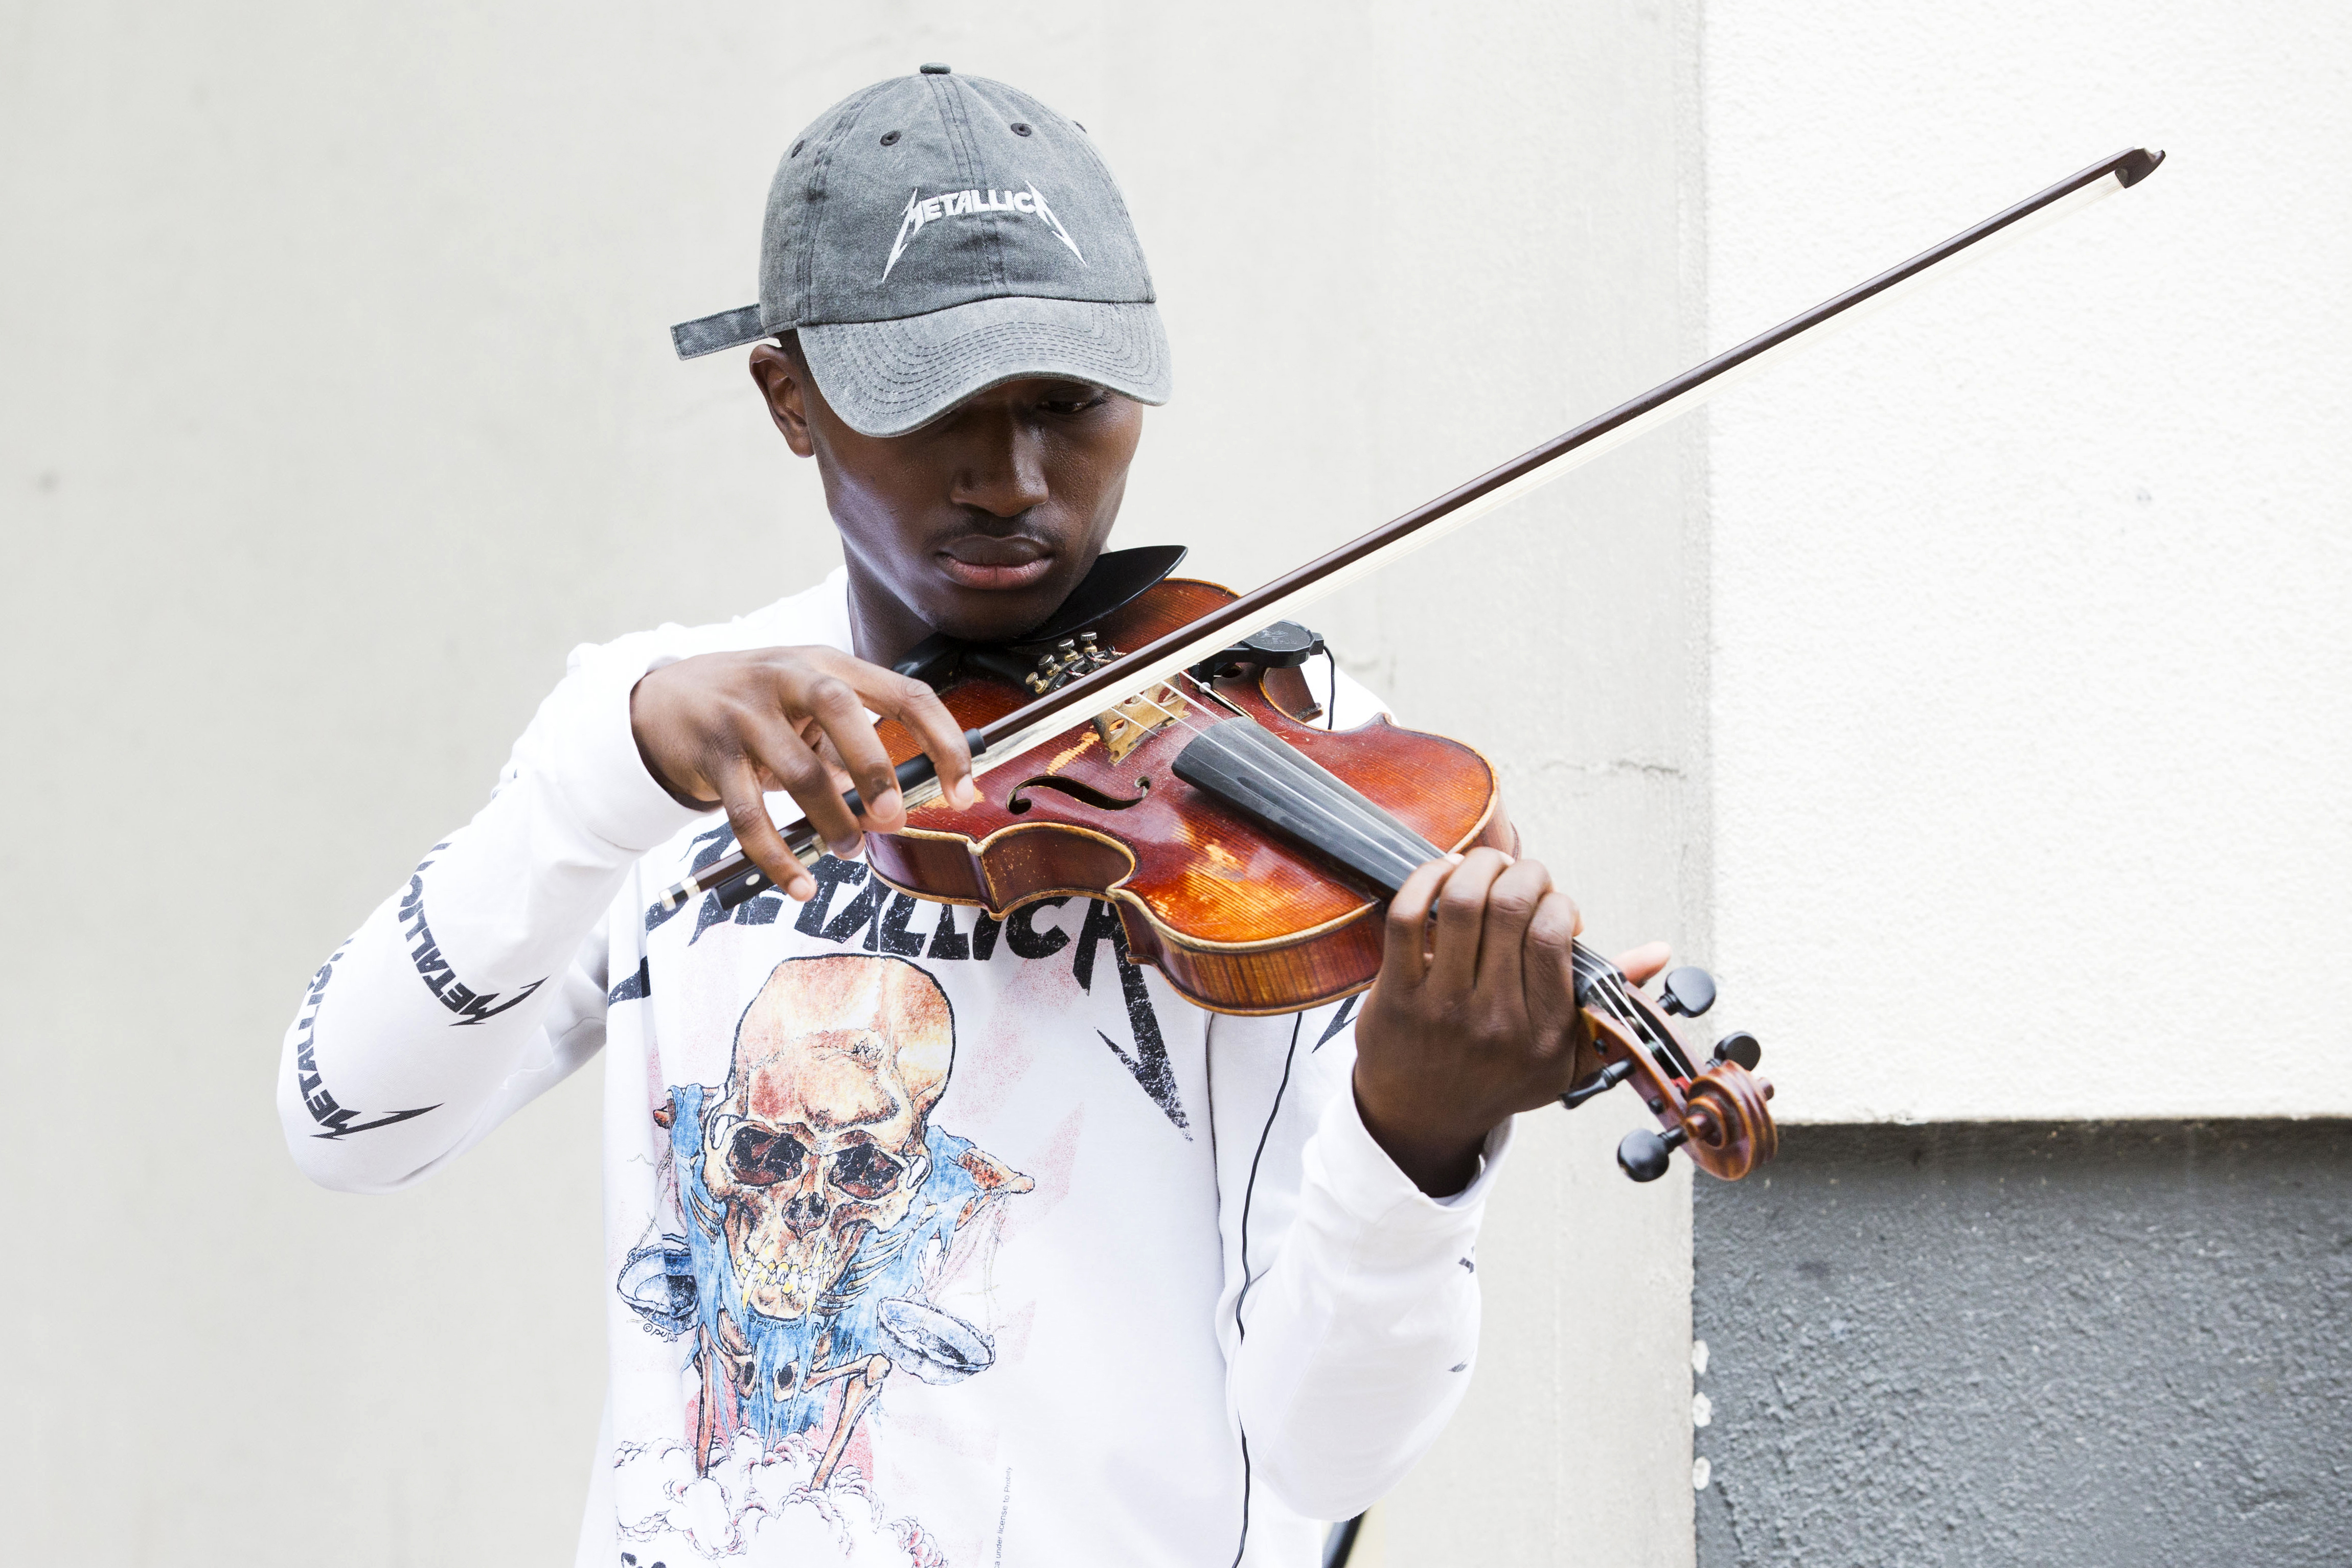 Rickey Turner, 21, plays the violin outside the Made in America festival.